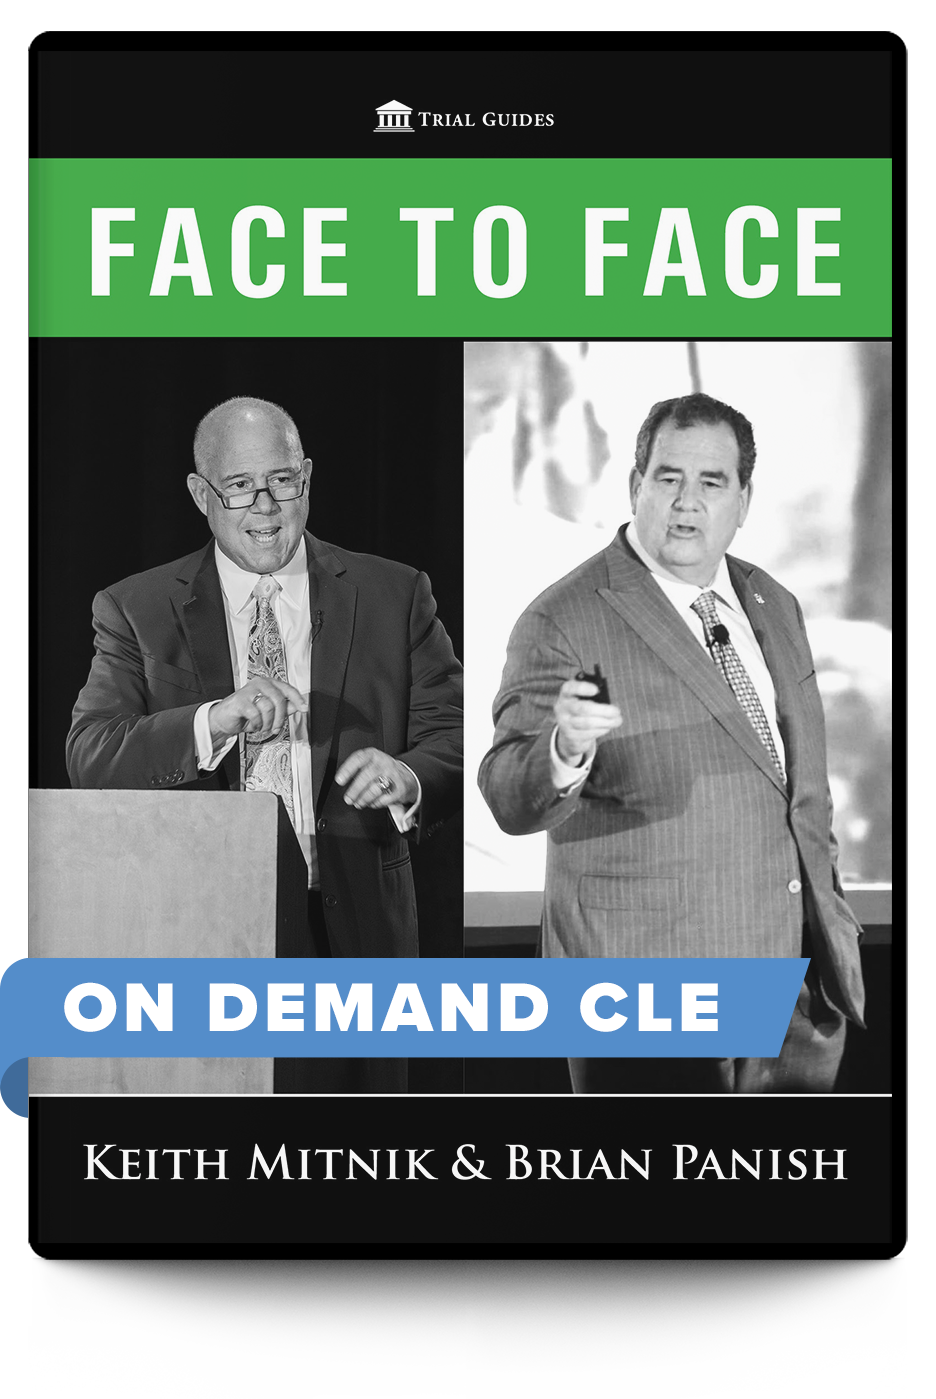 Face to Face: Keith Mitnik & Brian Panish (On Demand CLE)